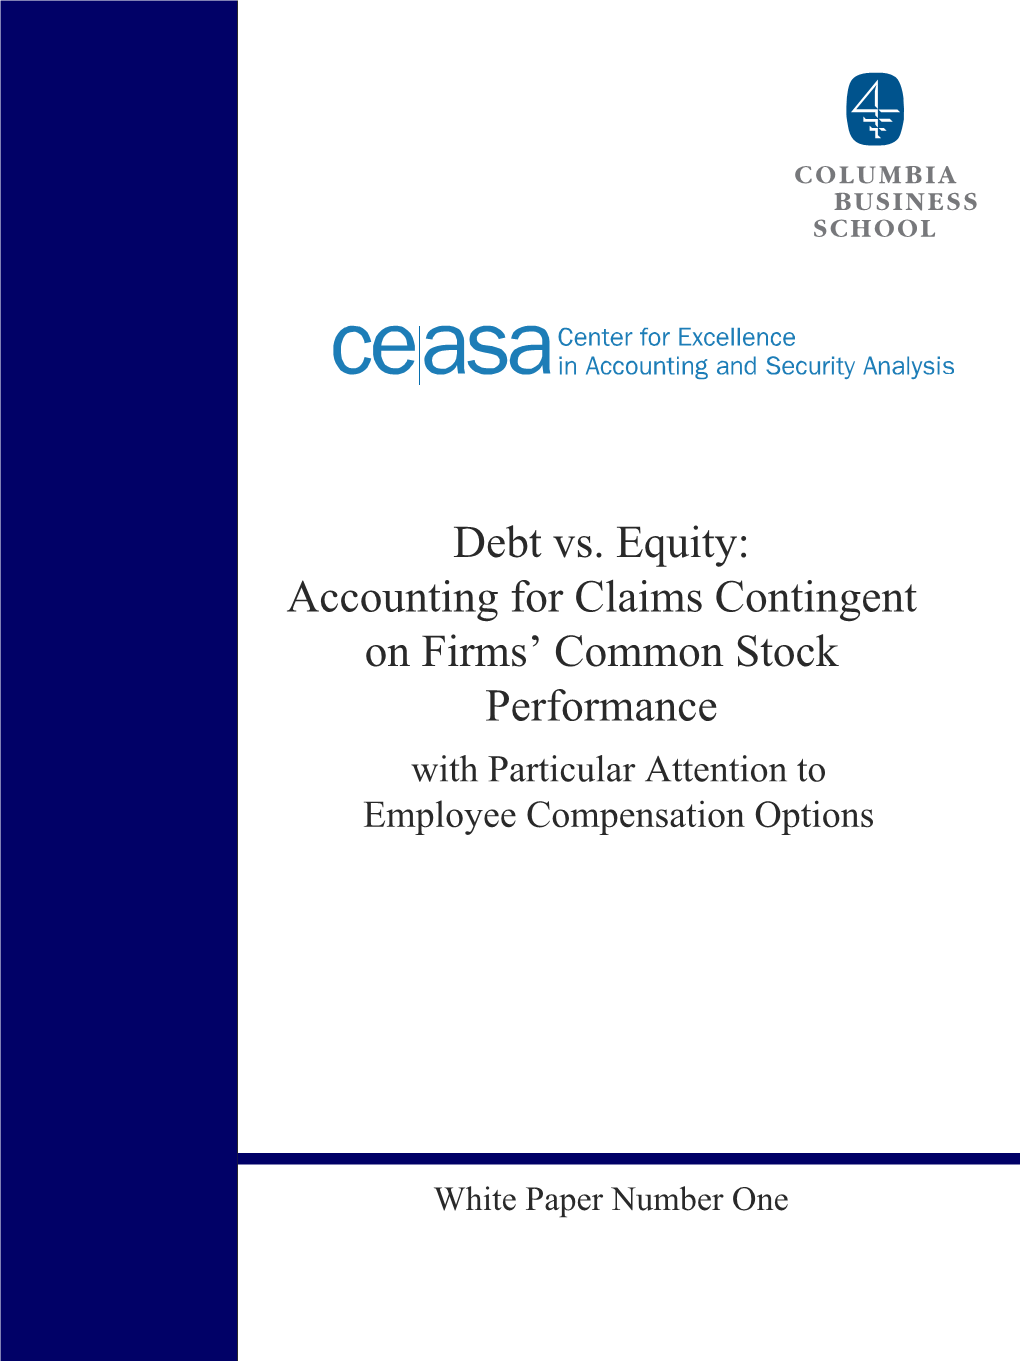 Debt Vs. Equity: Accounting for Claims Contingent on Firms' Common Stock Performance with Particular Attention To